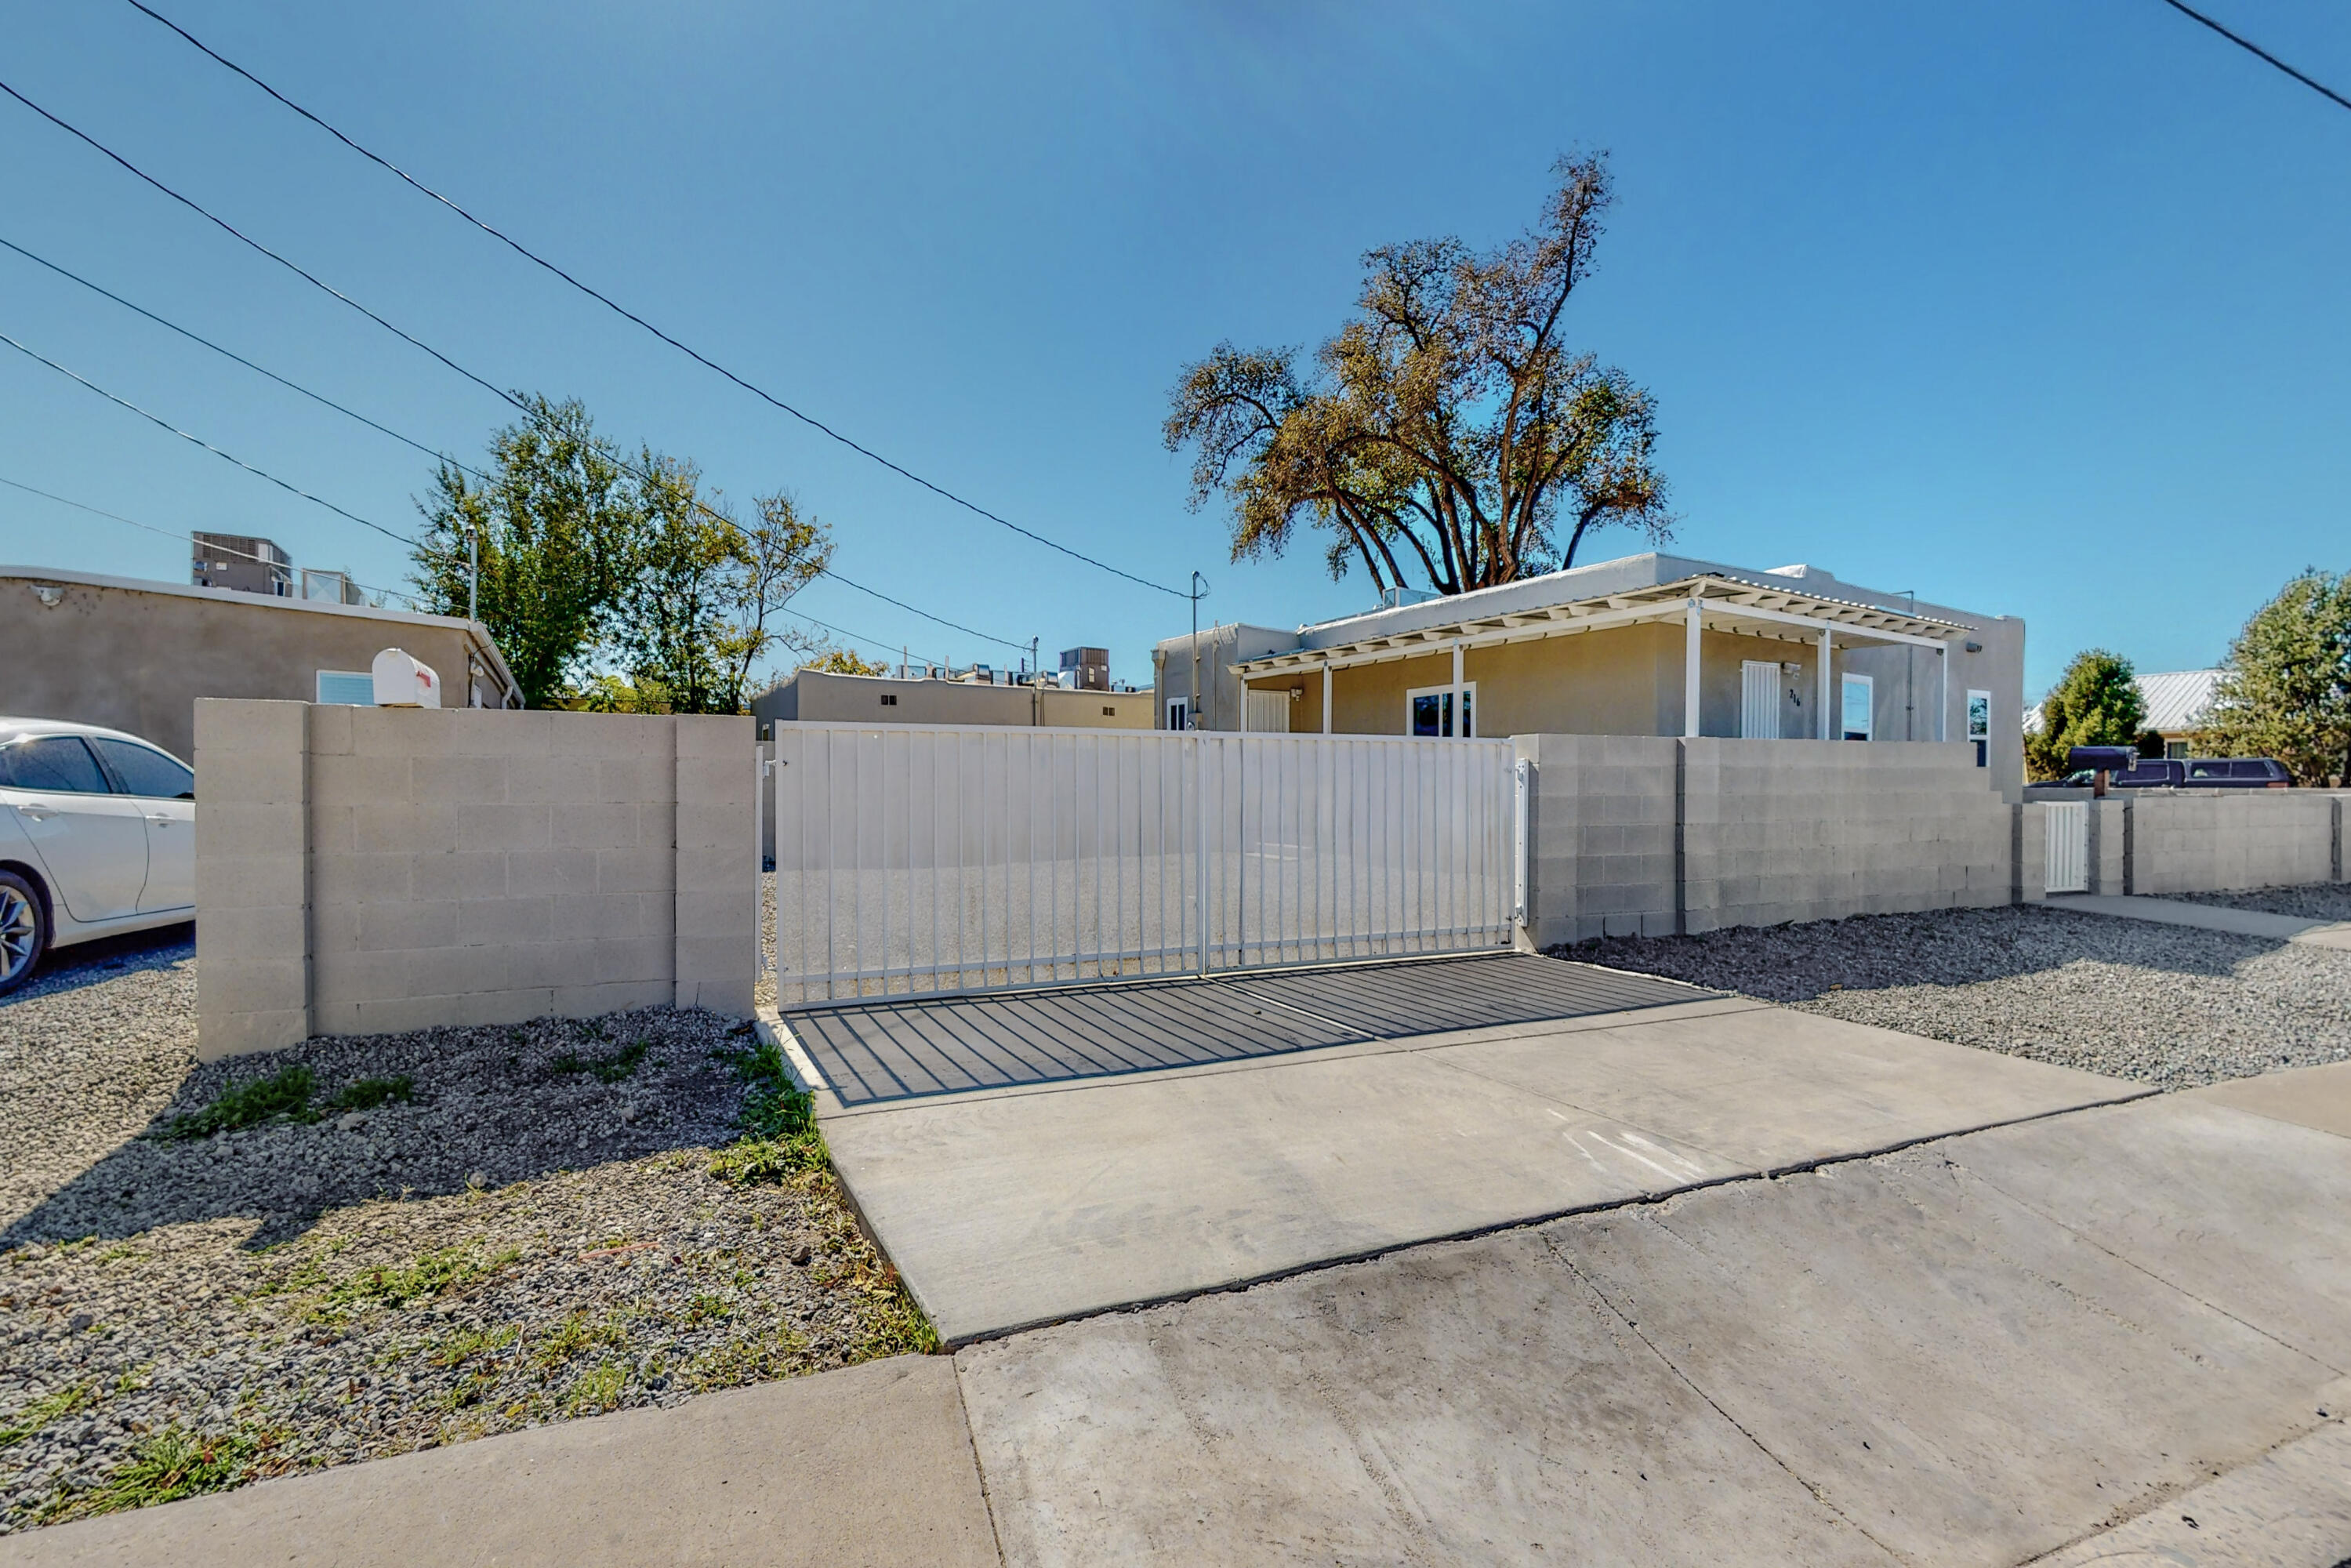 What an opportunity! 3 separate units consisting of unit B- 3 bed 2.5 bath 1201 sq ft. unit A- 2 bed 1 bath   877 sq ft unit C- 2 bed 1 bath 744 sq ft.All 3 units occupied. MX-M zoning opens up multiple uses for the next owner! All units have been recently updated. Flooring, cabinets, granite tops all new stainless-steel appliances. refrigerator, microwaves, gas stoves. New HVAC all new plumbing, including sewer lines, updated electrical, new TPO roof on unit B (3 bed).